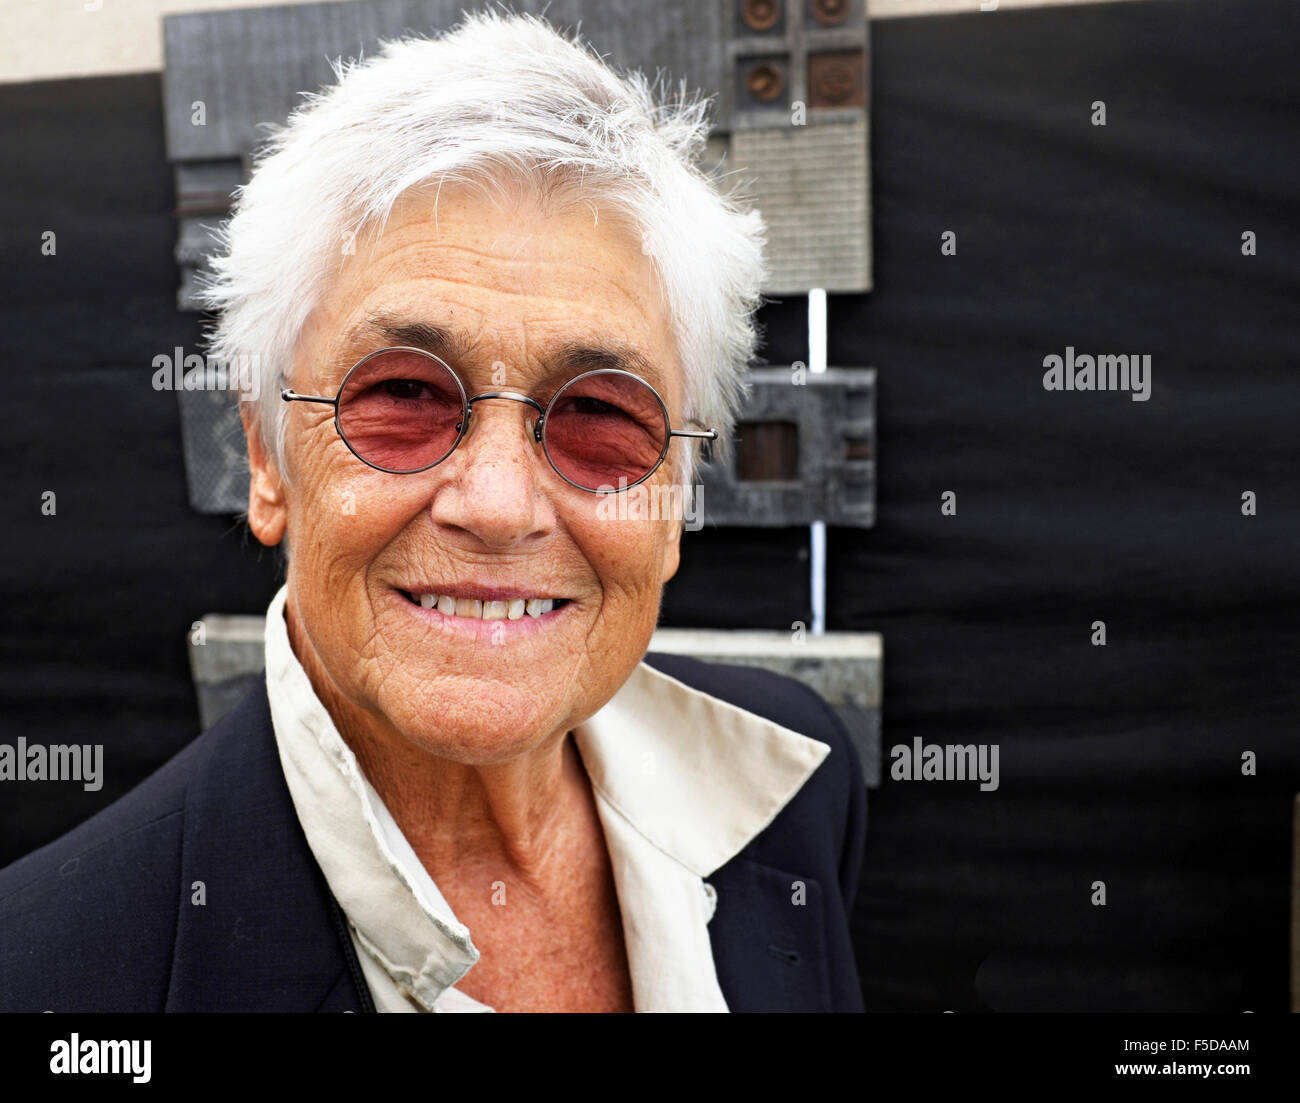 A middle-aged woman with very short hair wearing tinted glasses. She is artist Grayson Malone. Stock Photo